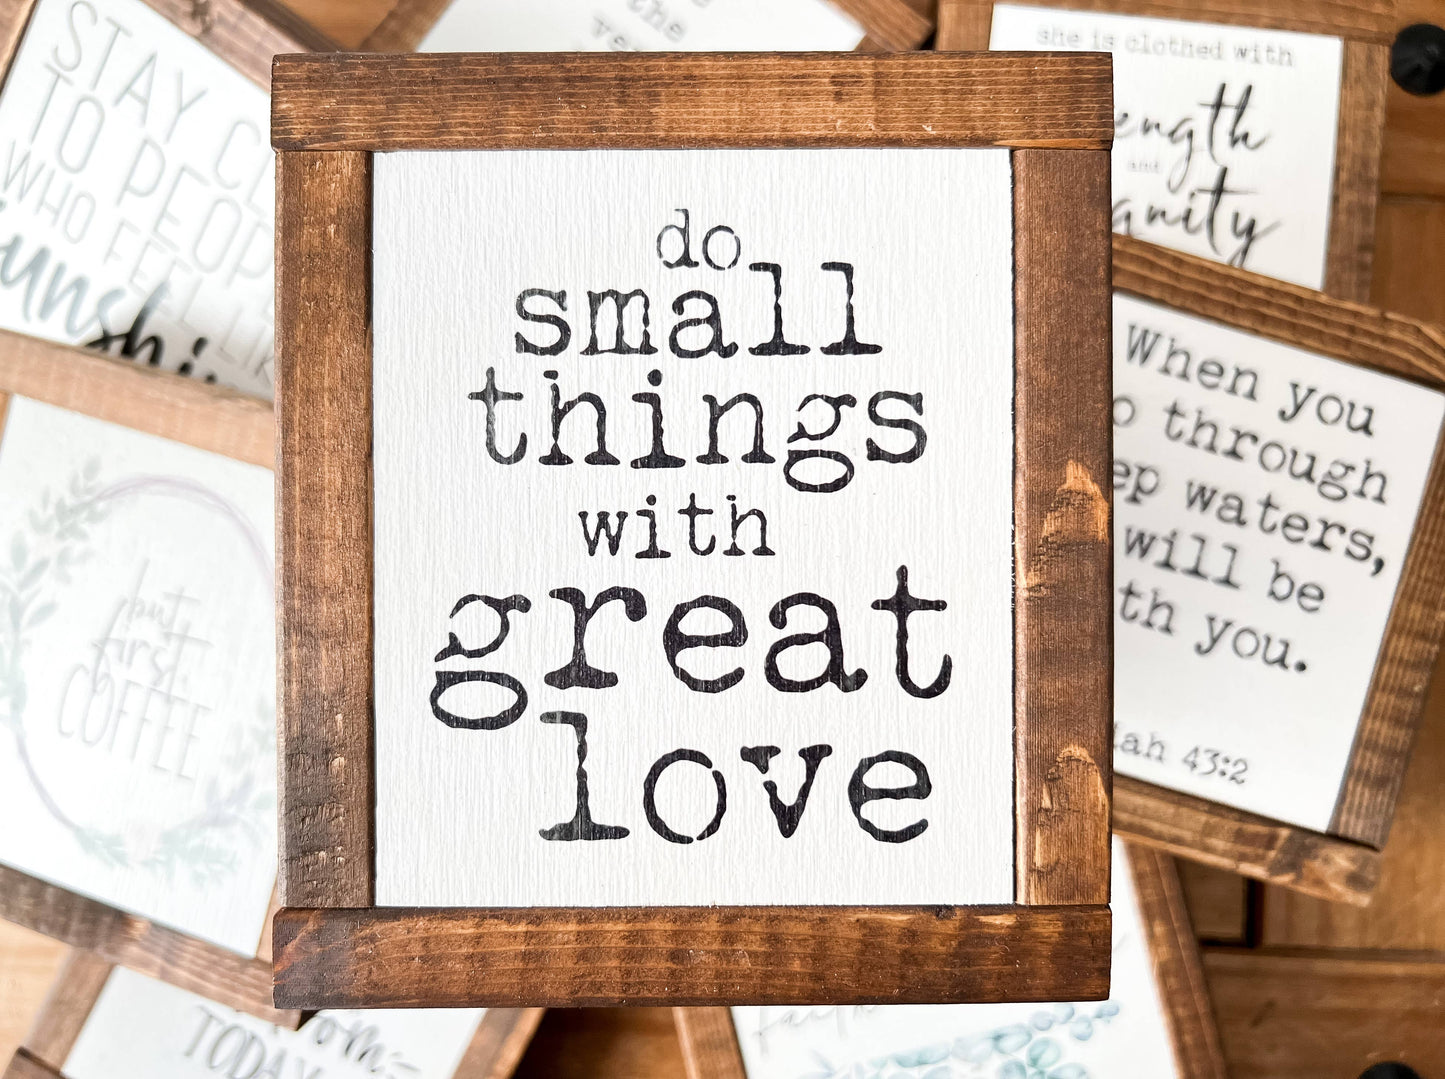 Inspired Findings - Do Small Things mini